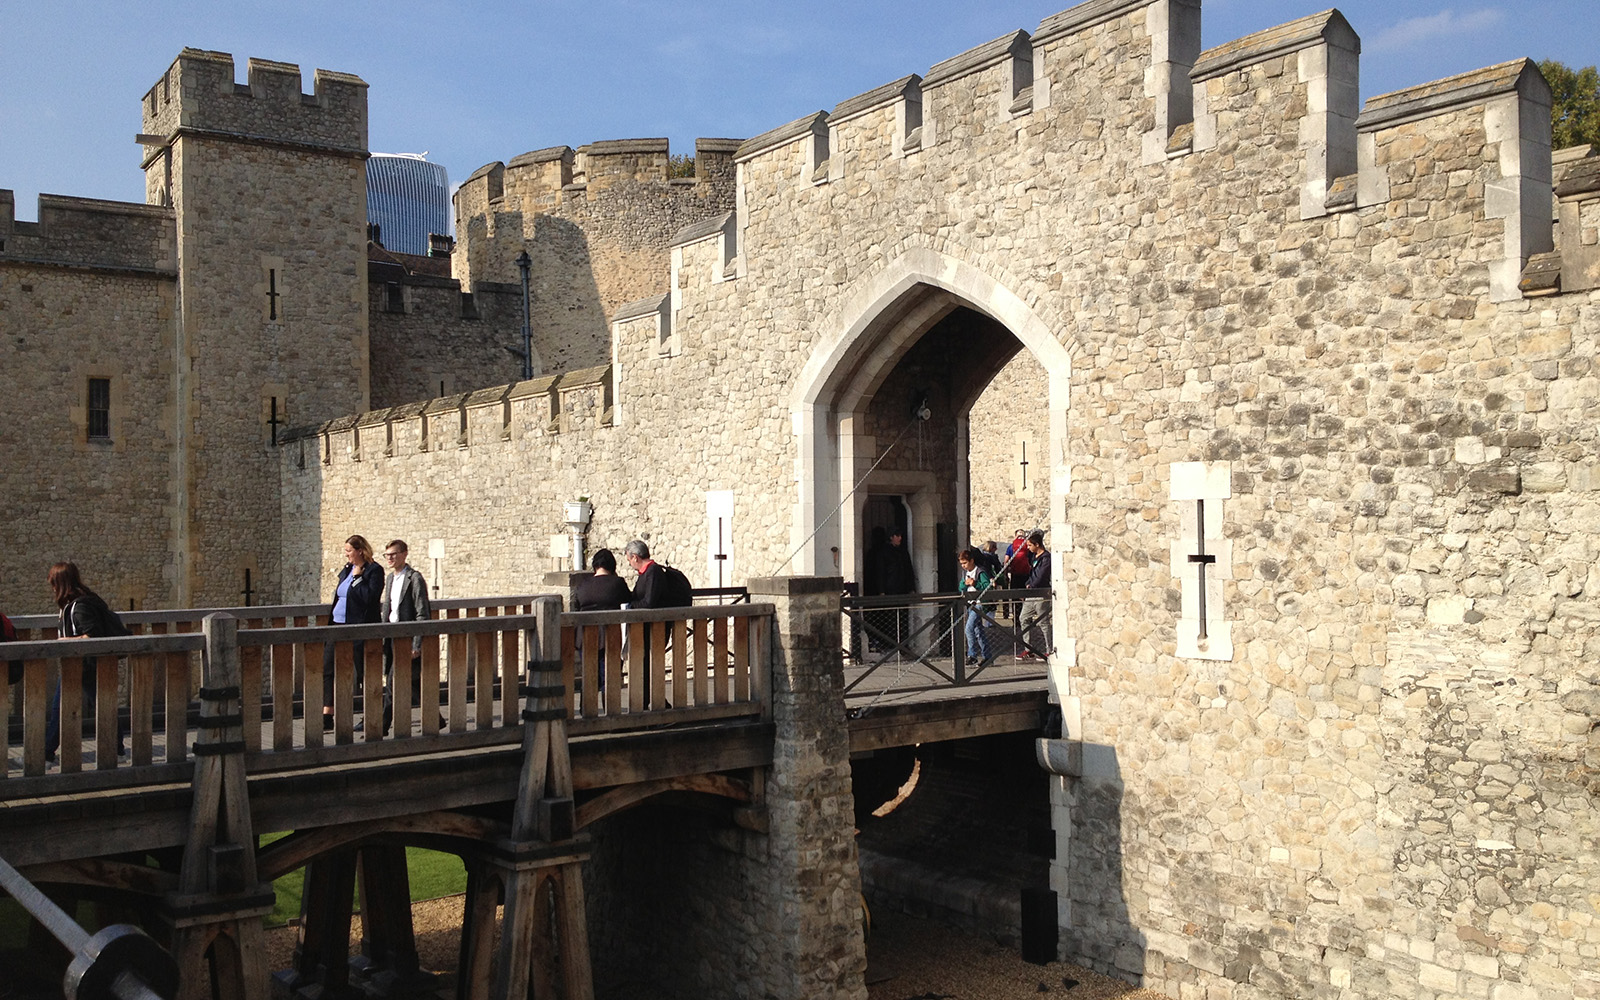 Tower of London, 4 October 2015